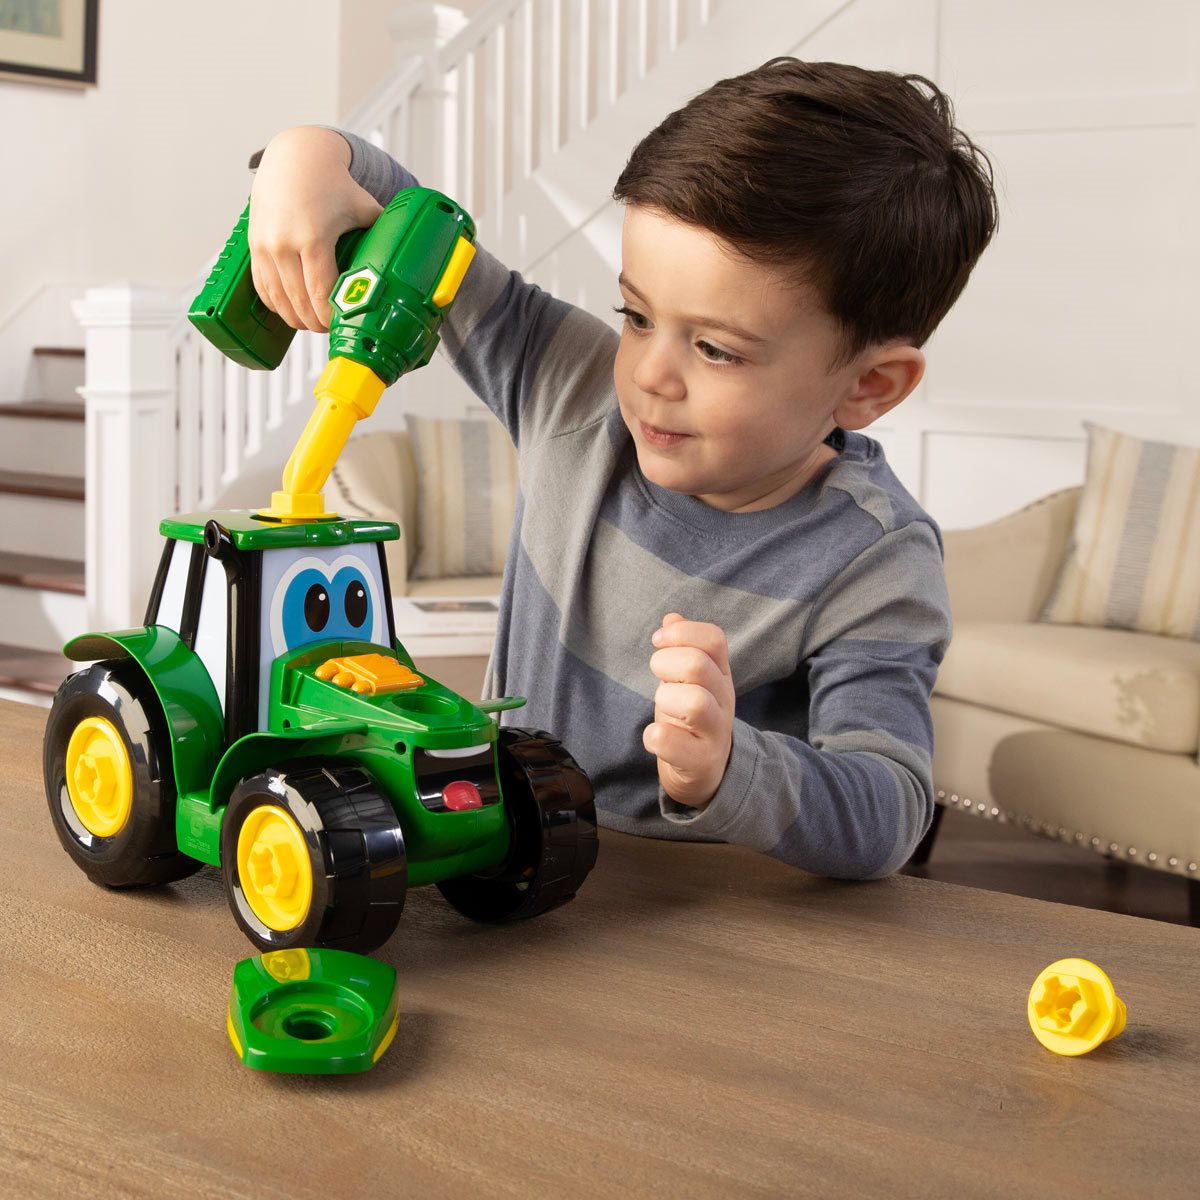 TOMY John Deer Build A Johnny Tractor Toy